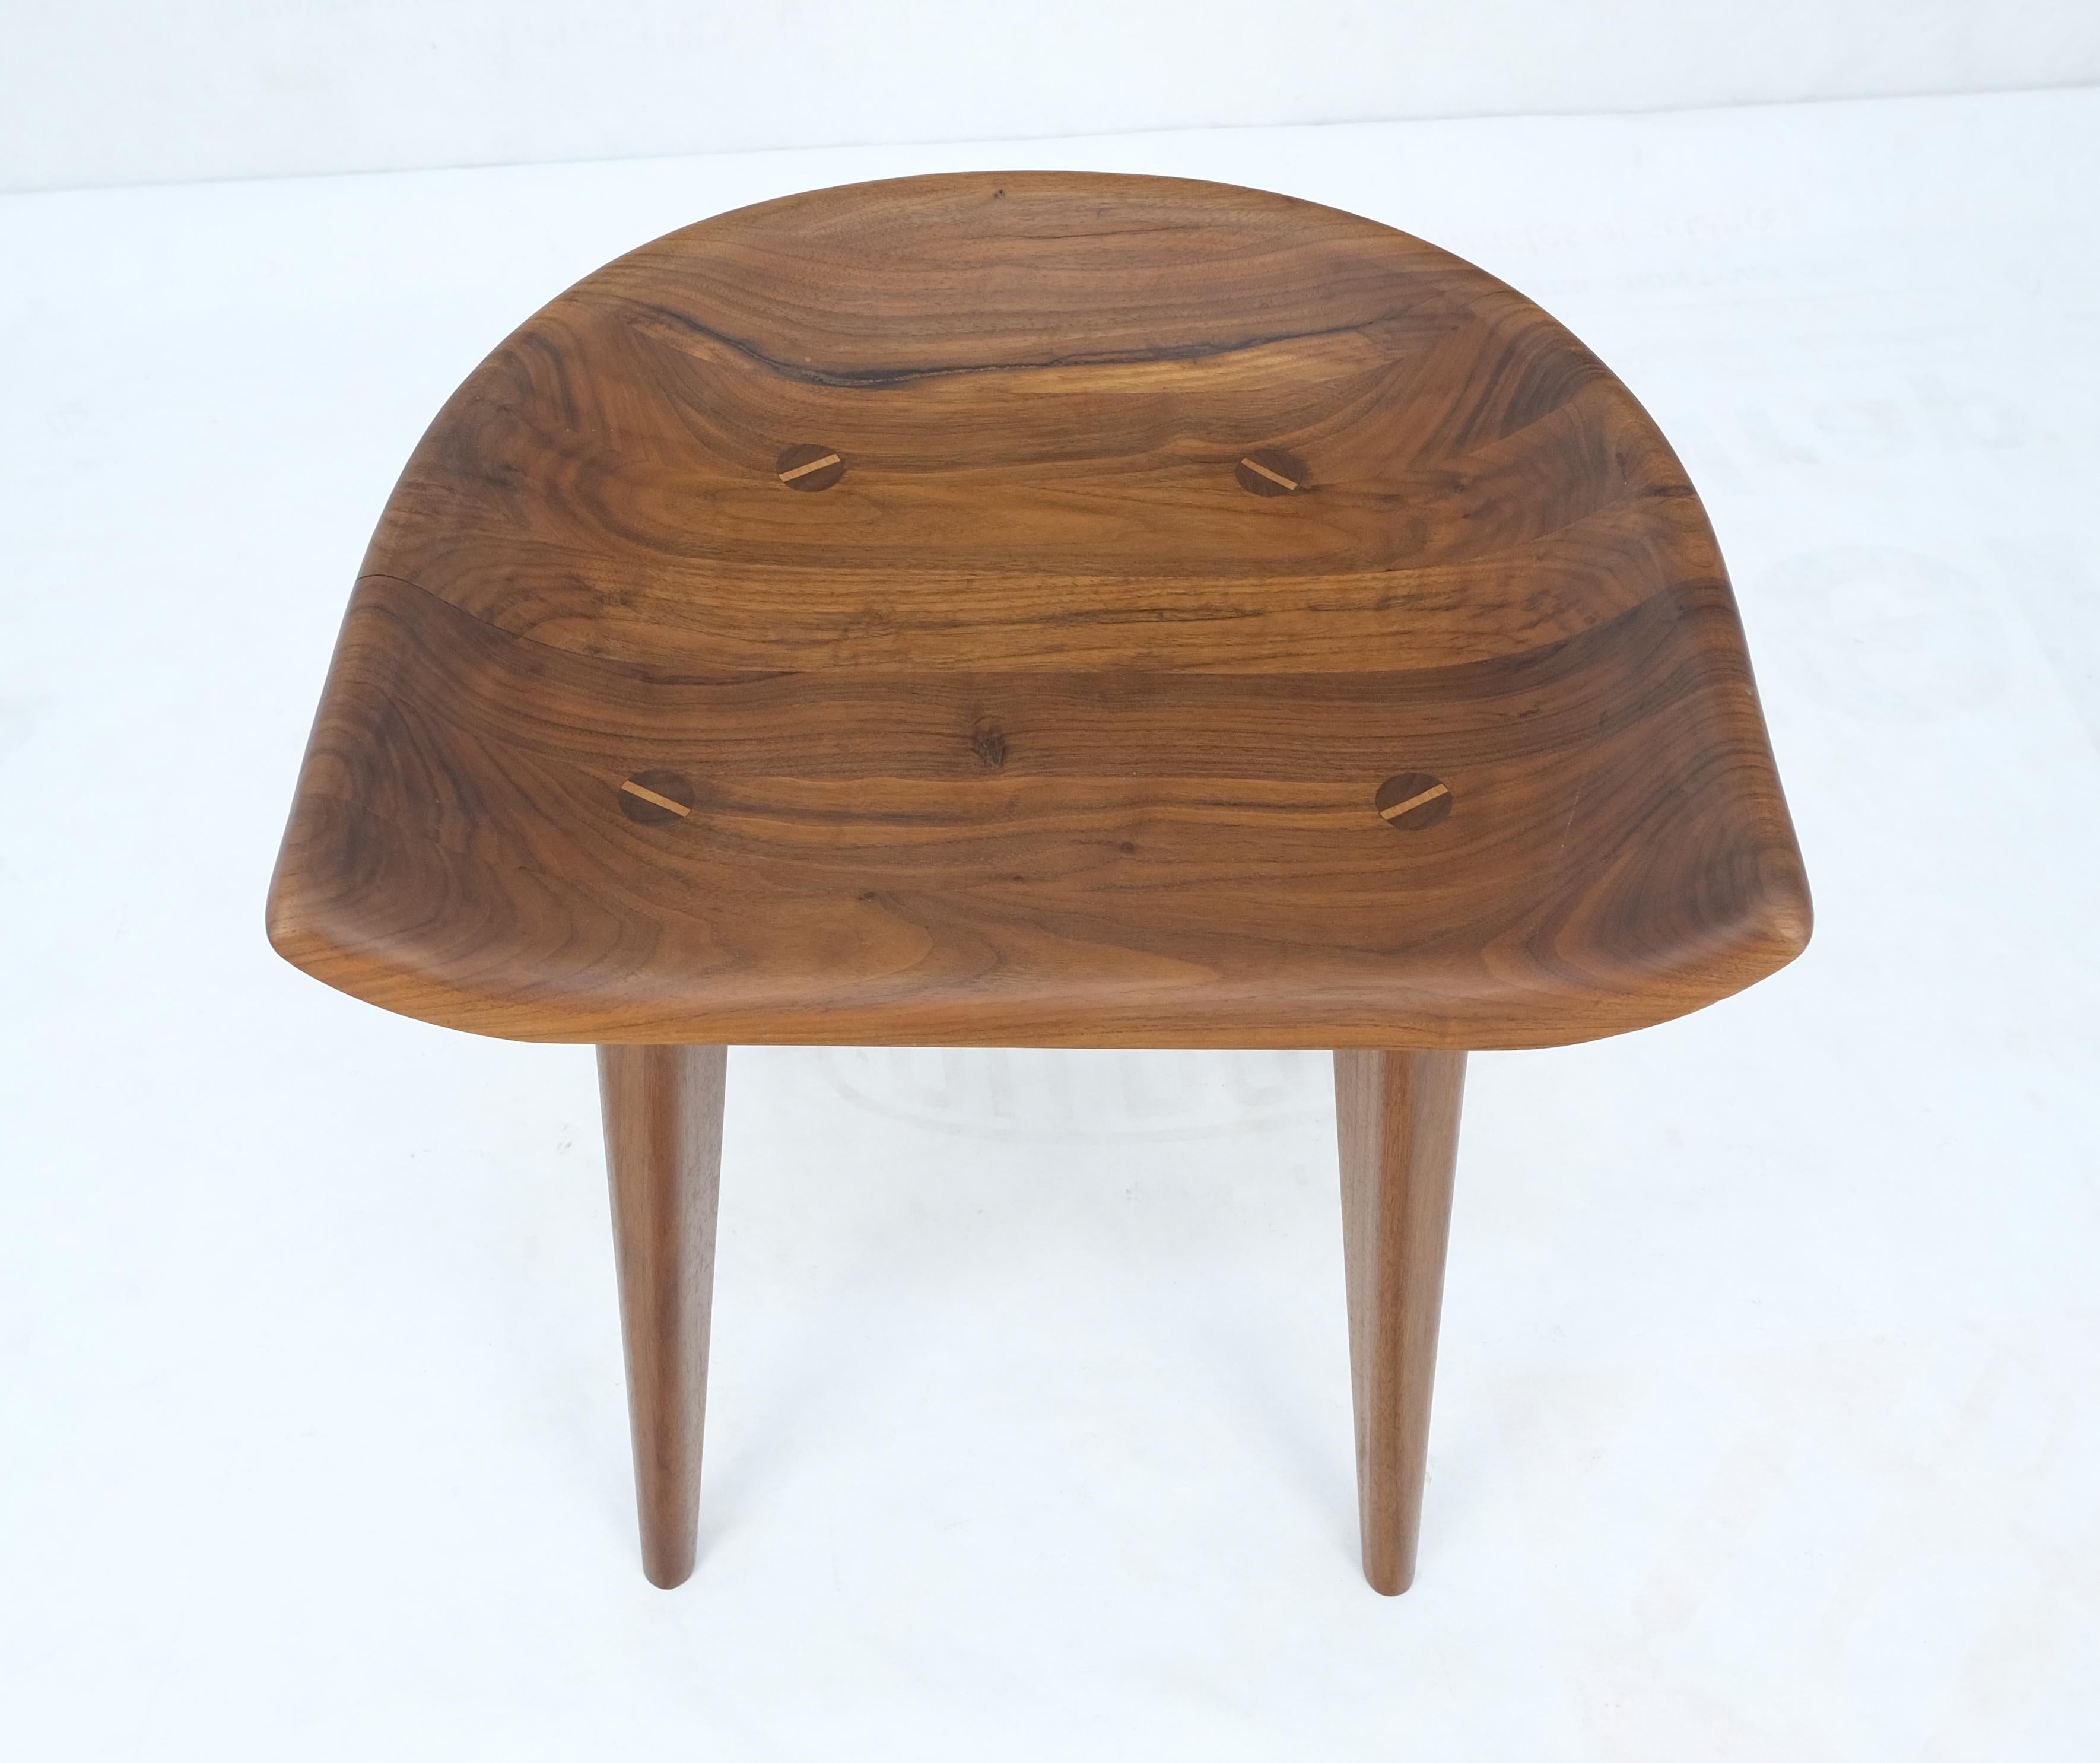 Contemporary Solid Carved Seat Oiled Walnut Chair on Dowel Legs Mint! For Sale